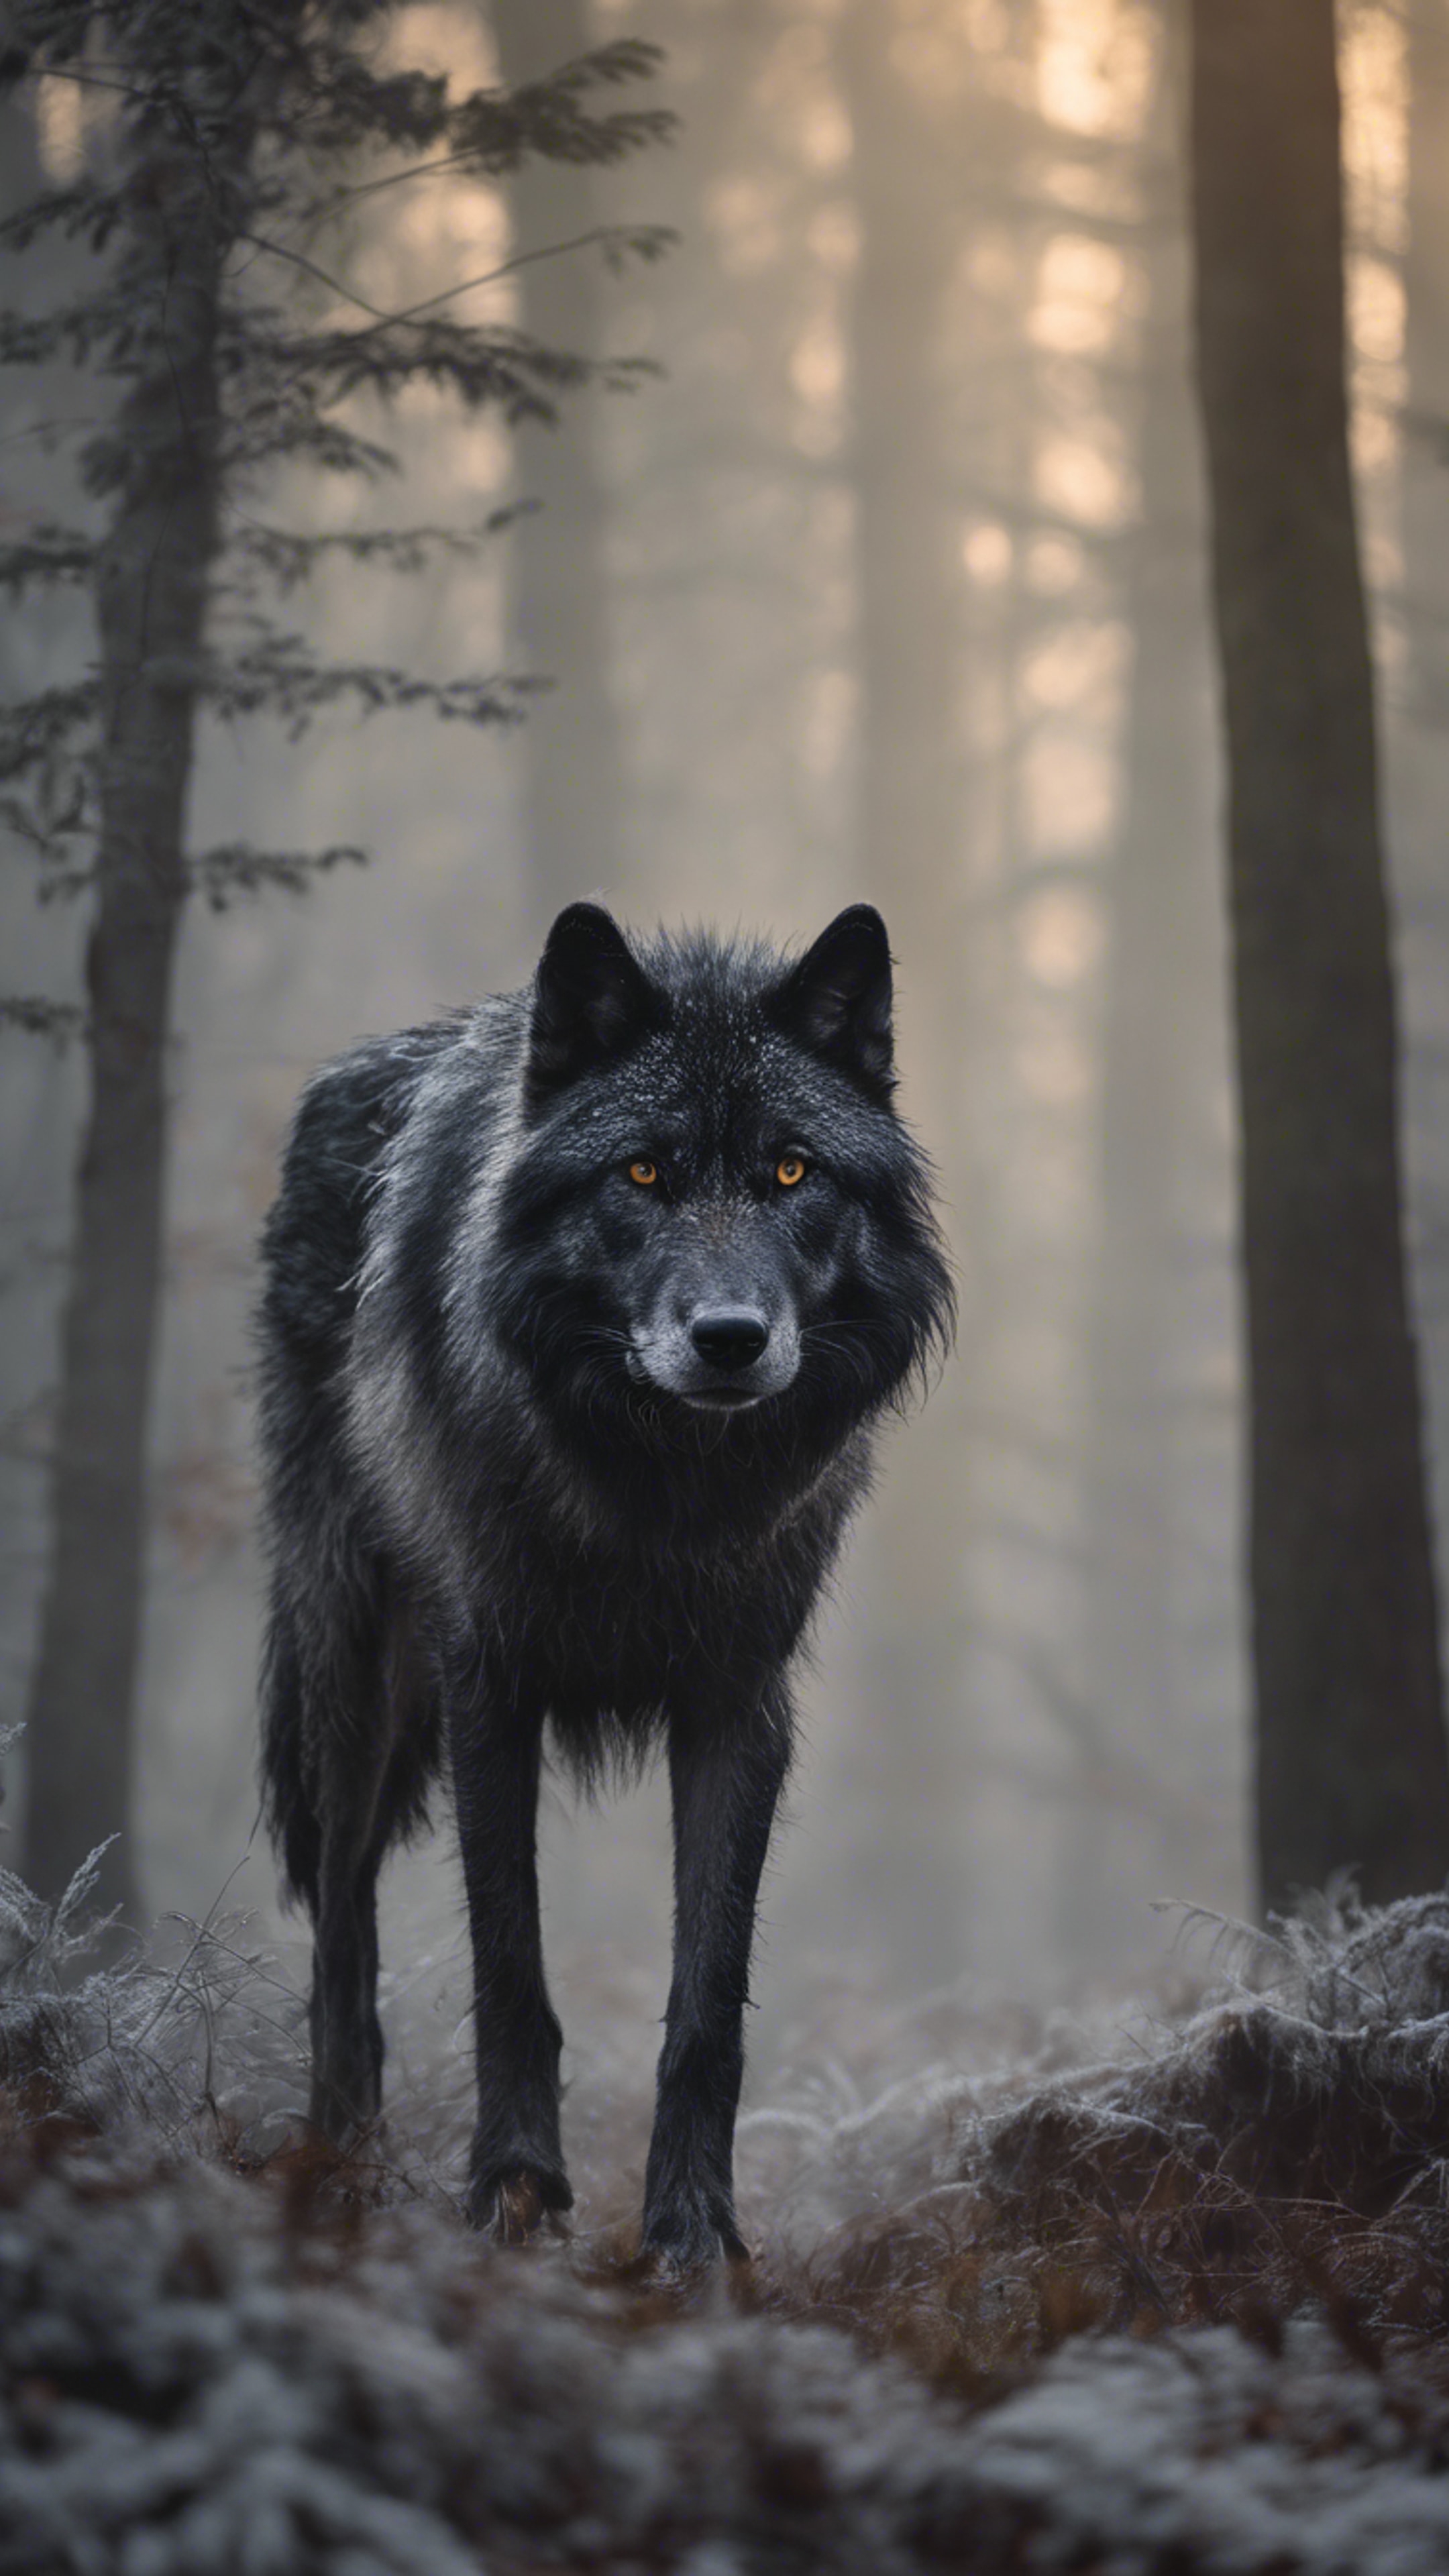 A cool black and gray shaggy wolf prowling through a mist-filled forest at dawn. Tapet[e0adfa1209b347ac9a7e]